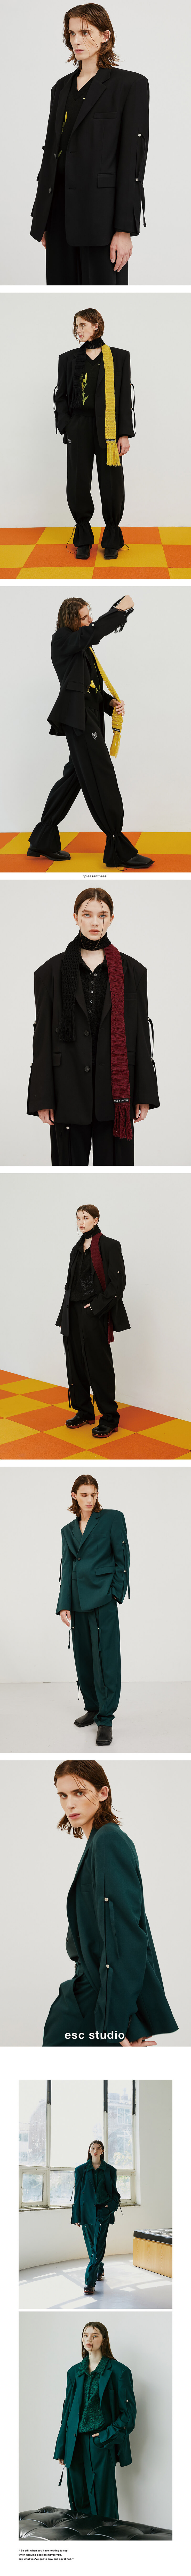 The ESC Studio Aesthetic Is Waiting To Be Enjoyed With This FW21 Collection